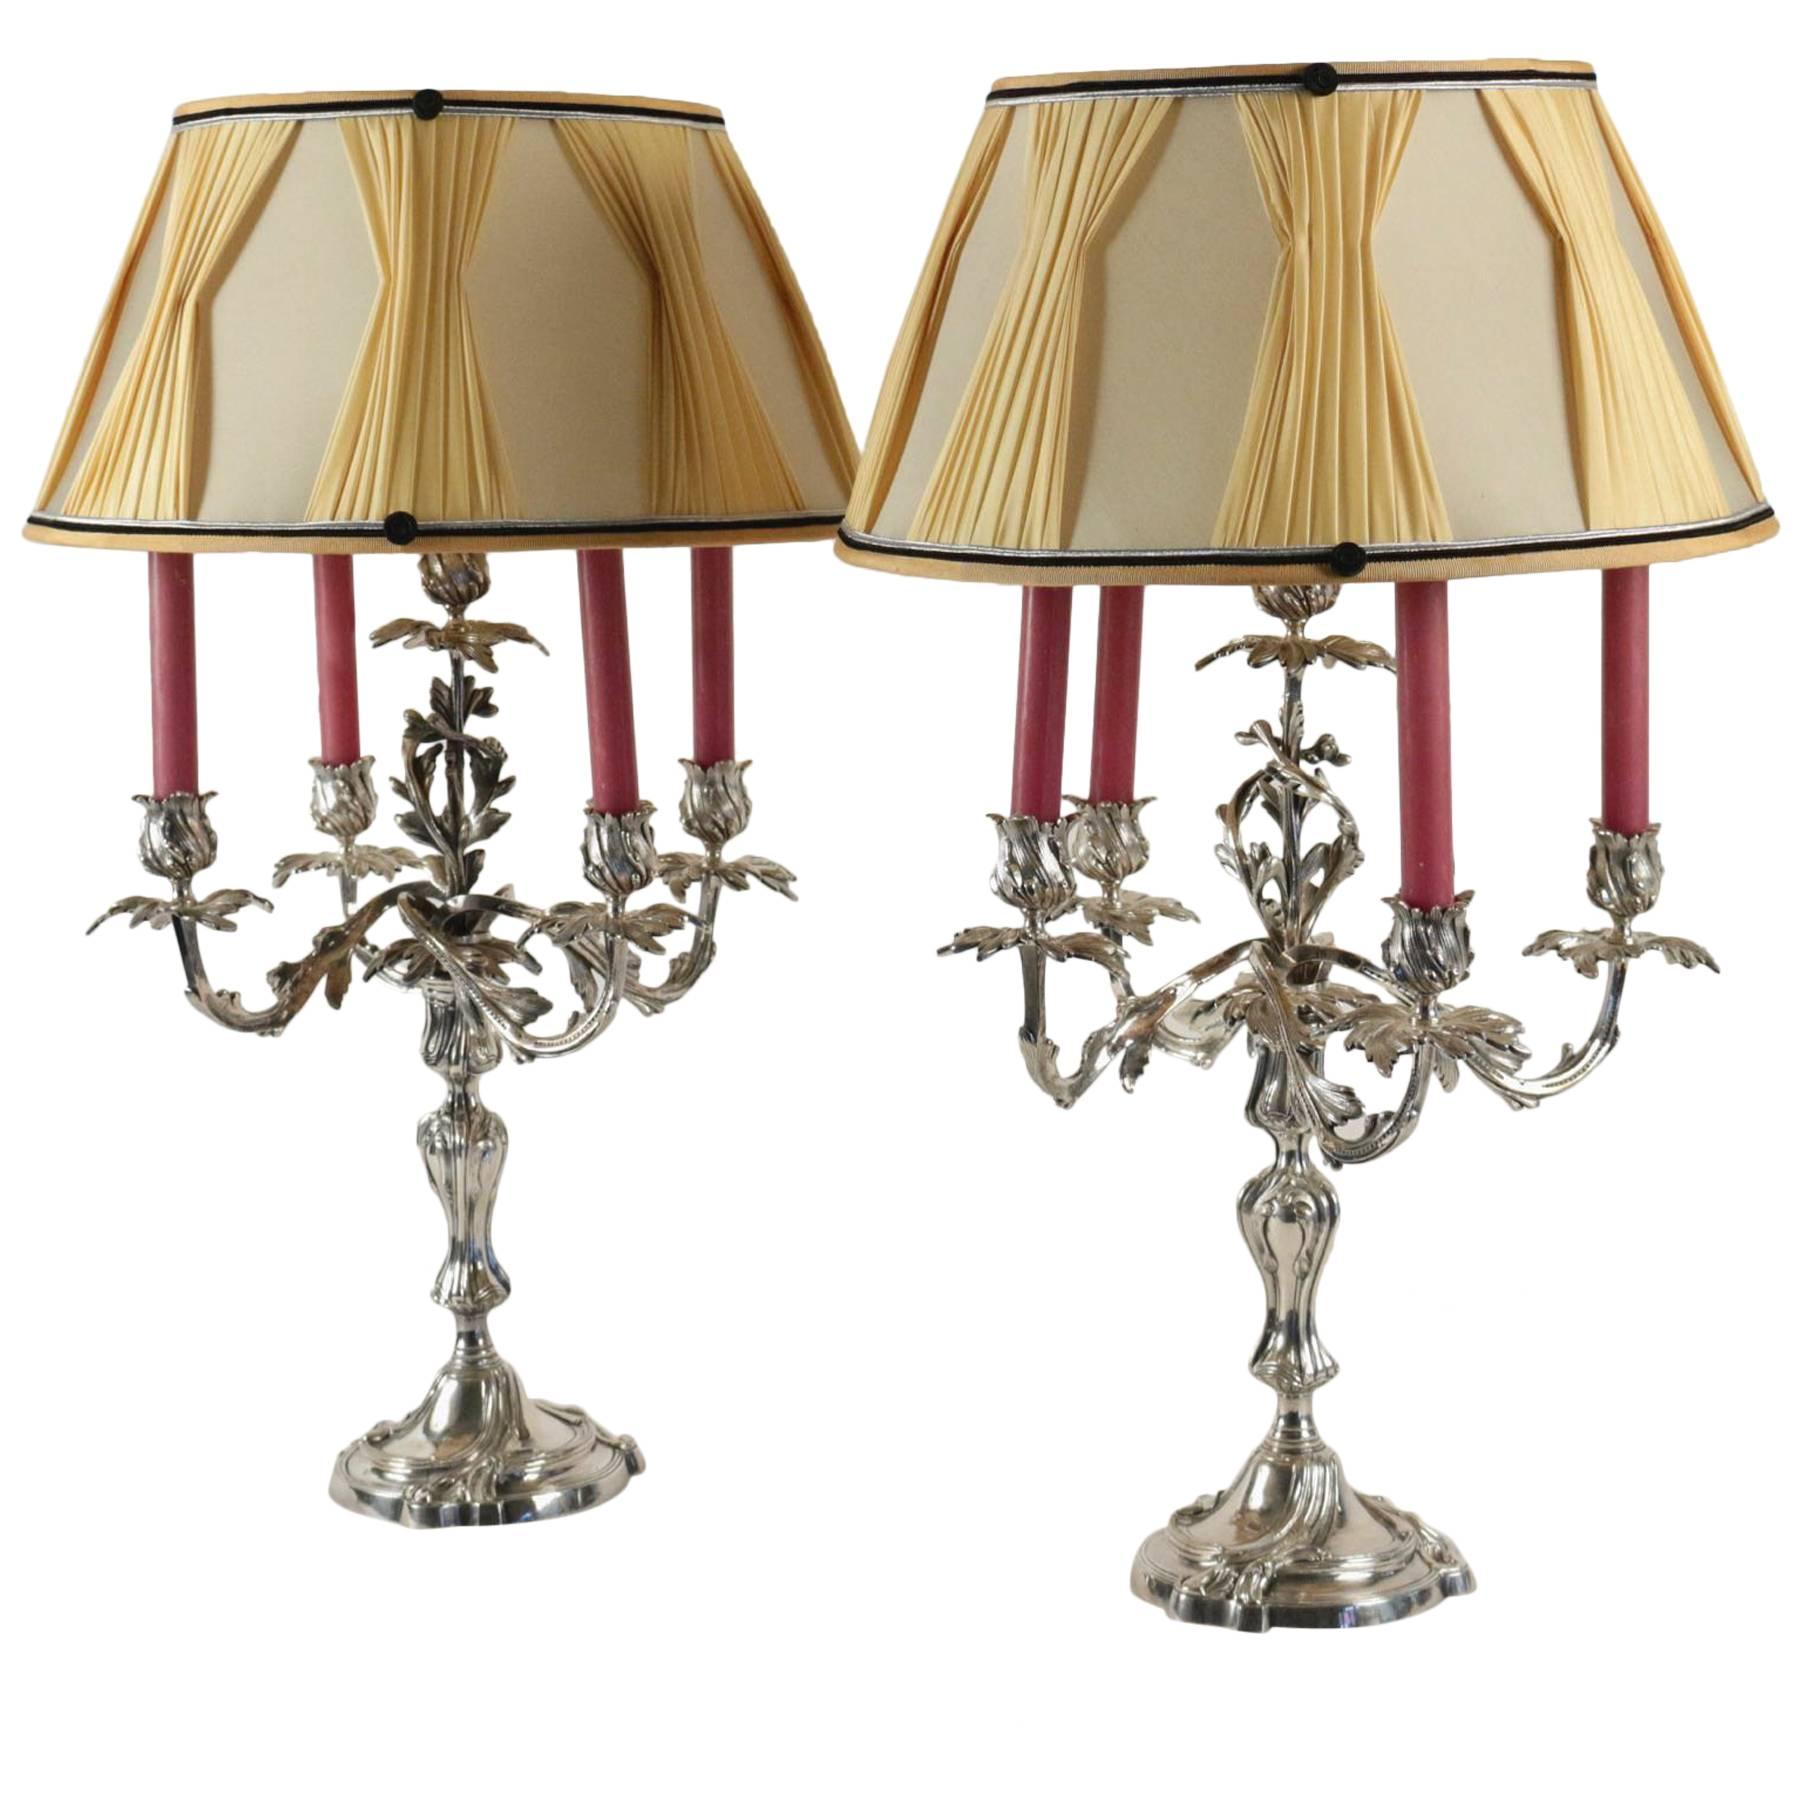 French Louis XV Style Pair of Silver Plate Candelabra Lamps, circa 1860-1880